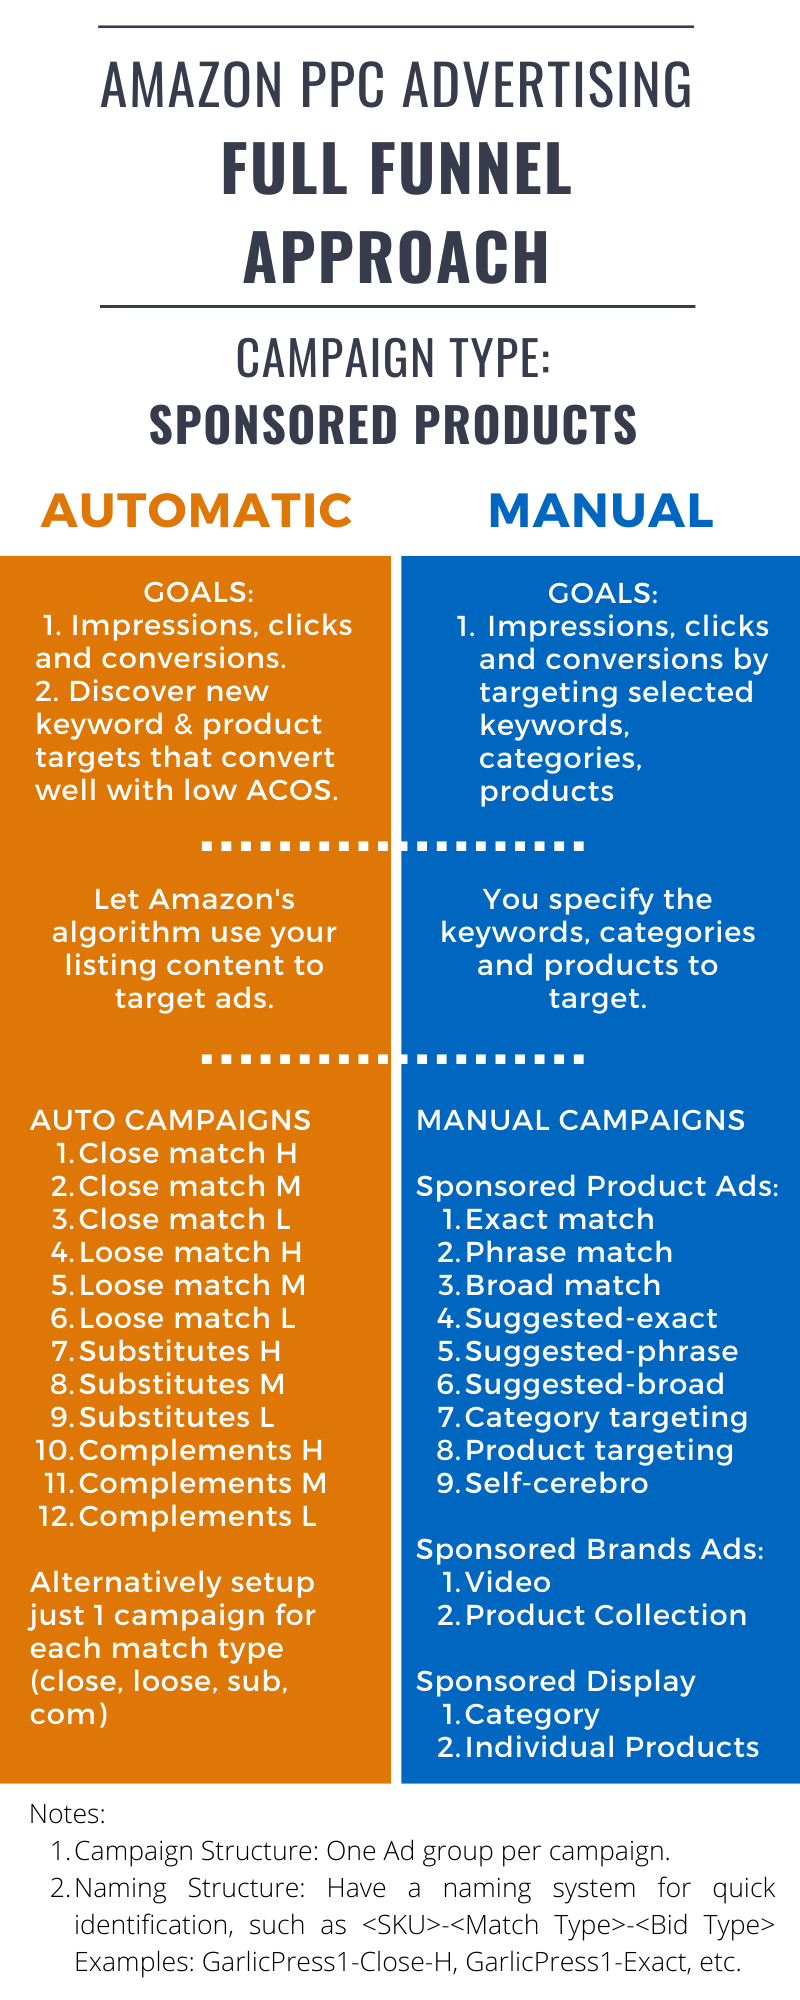 Amazon PPC Advertising Campaign Strategy